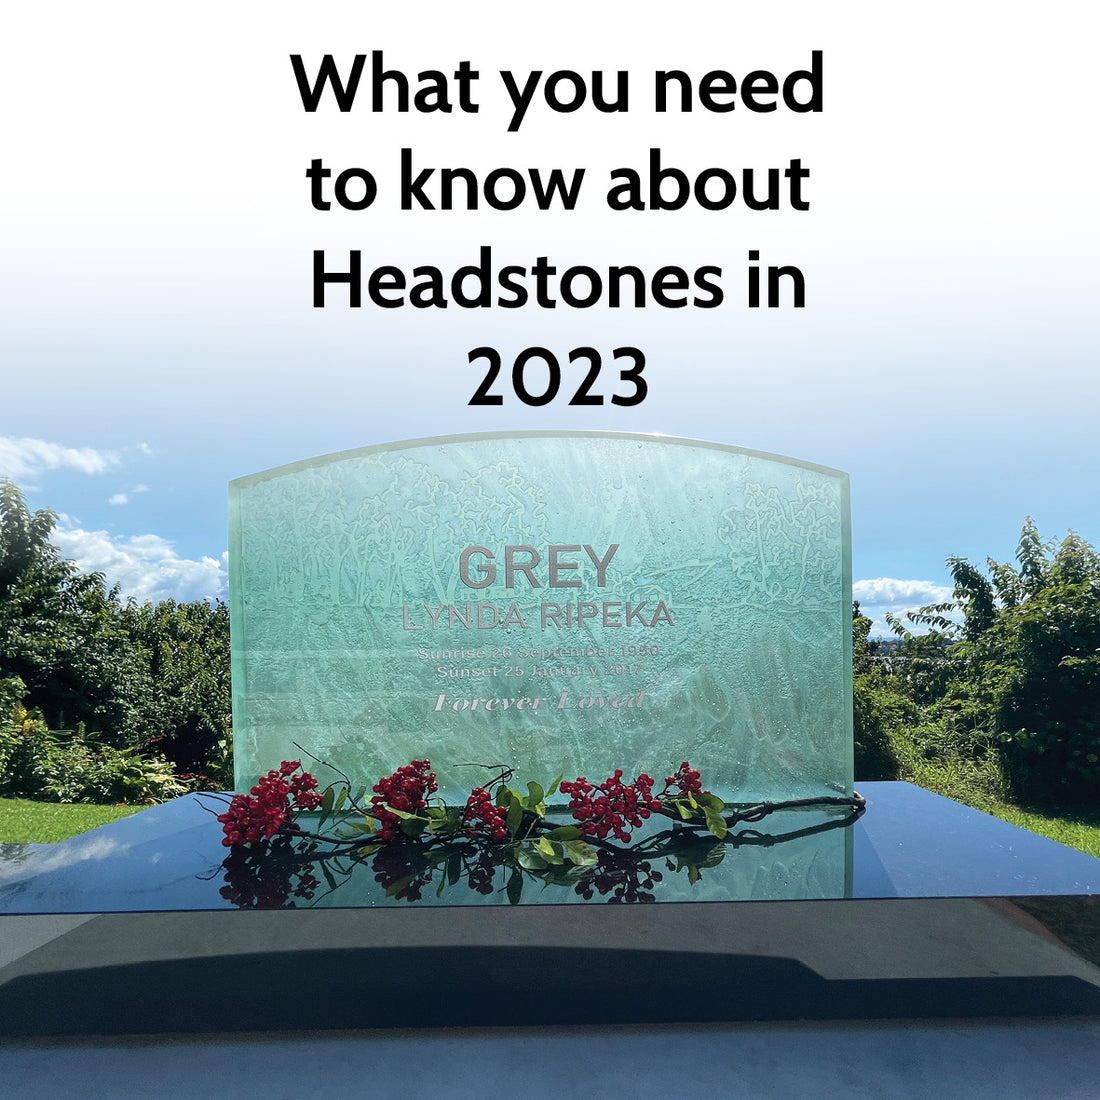 What you need to know about headstones in 2023